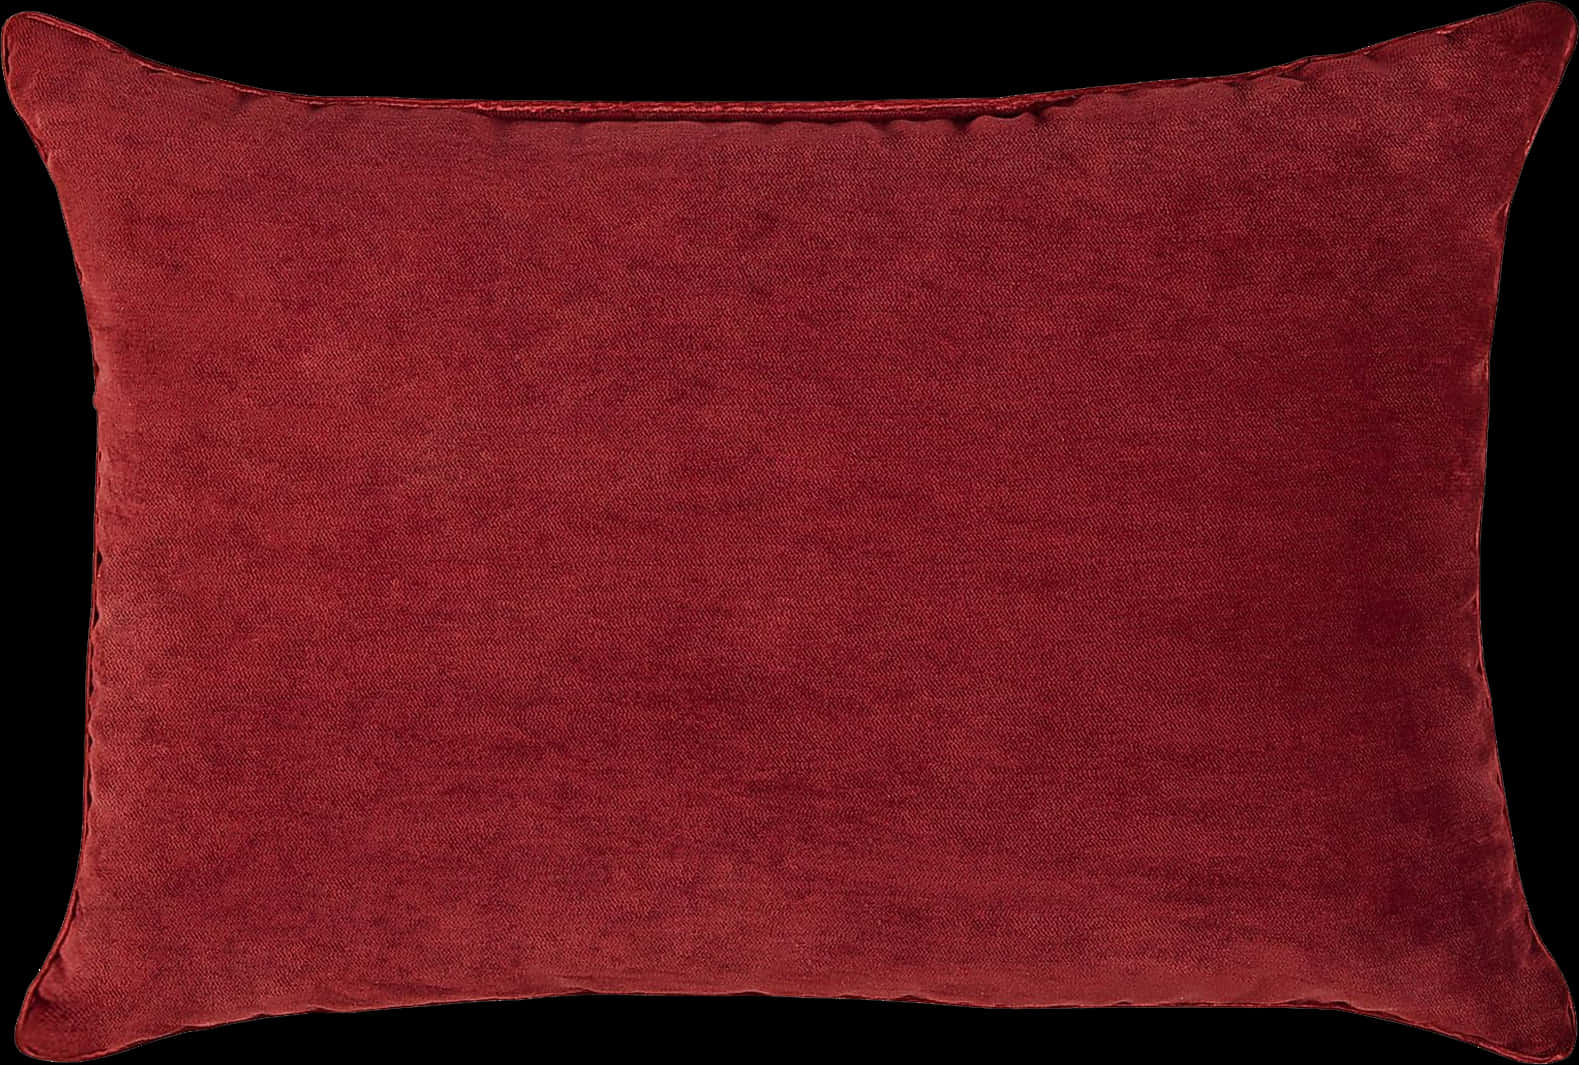 A Red Pillow With A Black Background